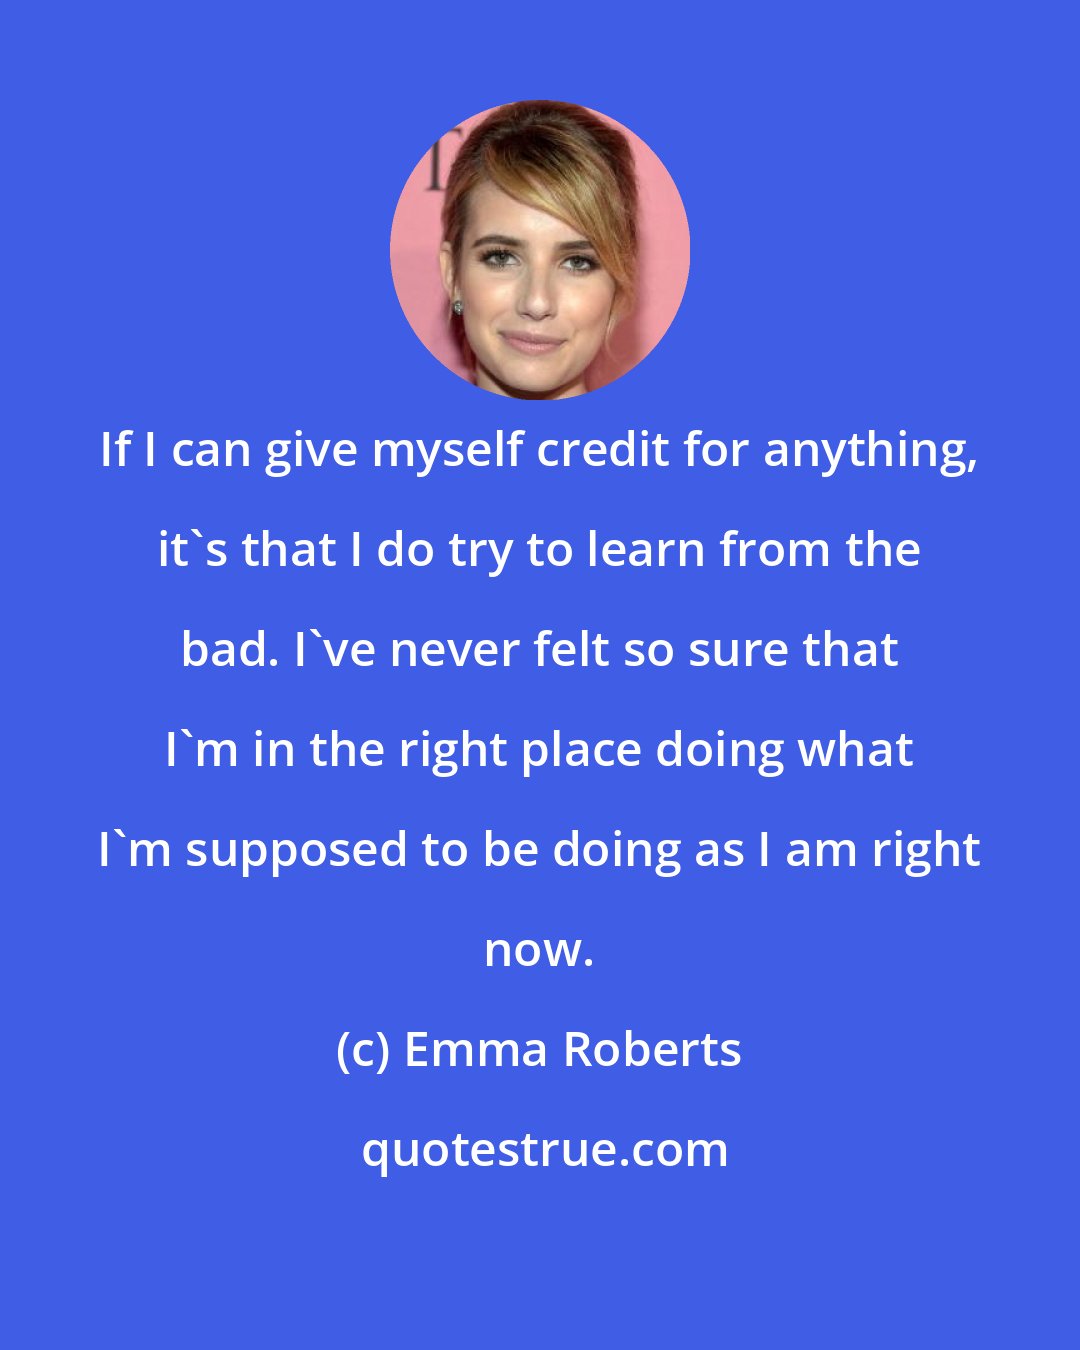 Emma Roberts: If I can give myself credit for anything, it's that I do try to learn from the bad. I've never felt so sure that I'm in the right place doing what I'm supposed to be doing as I am right now.